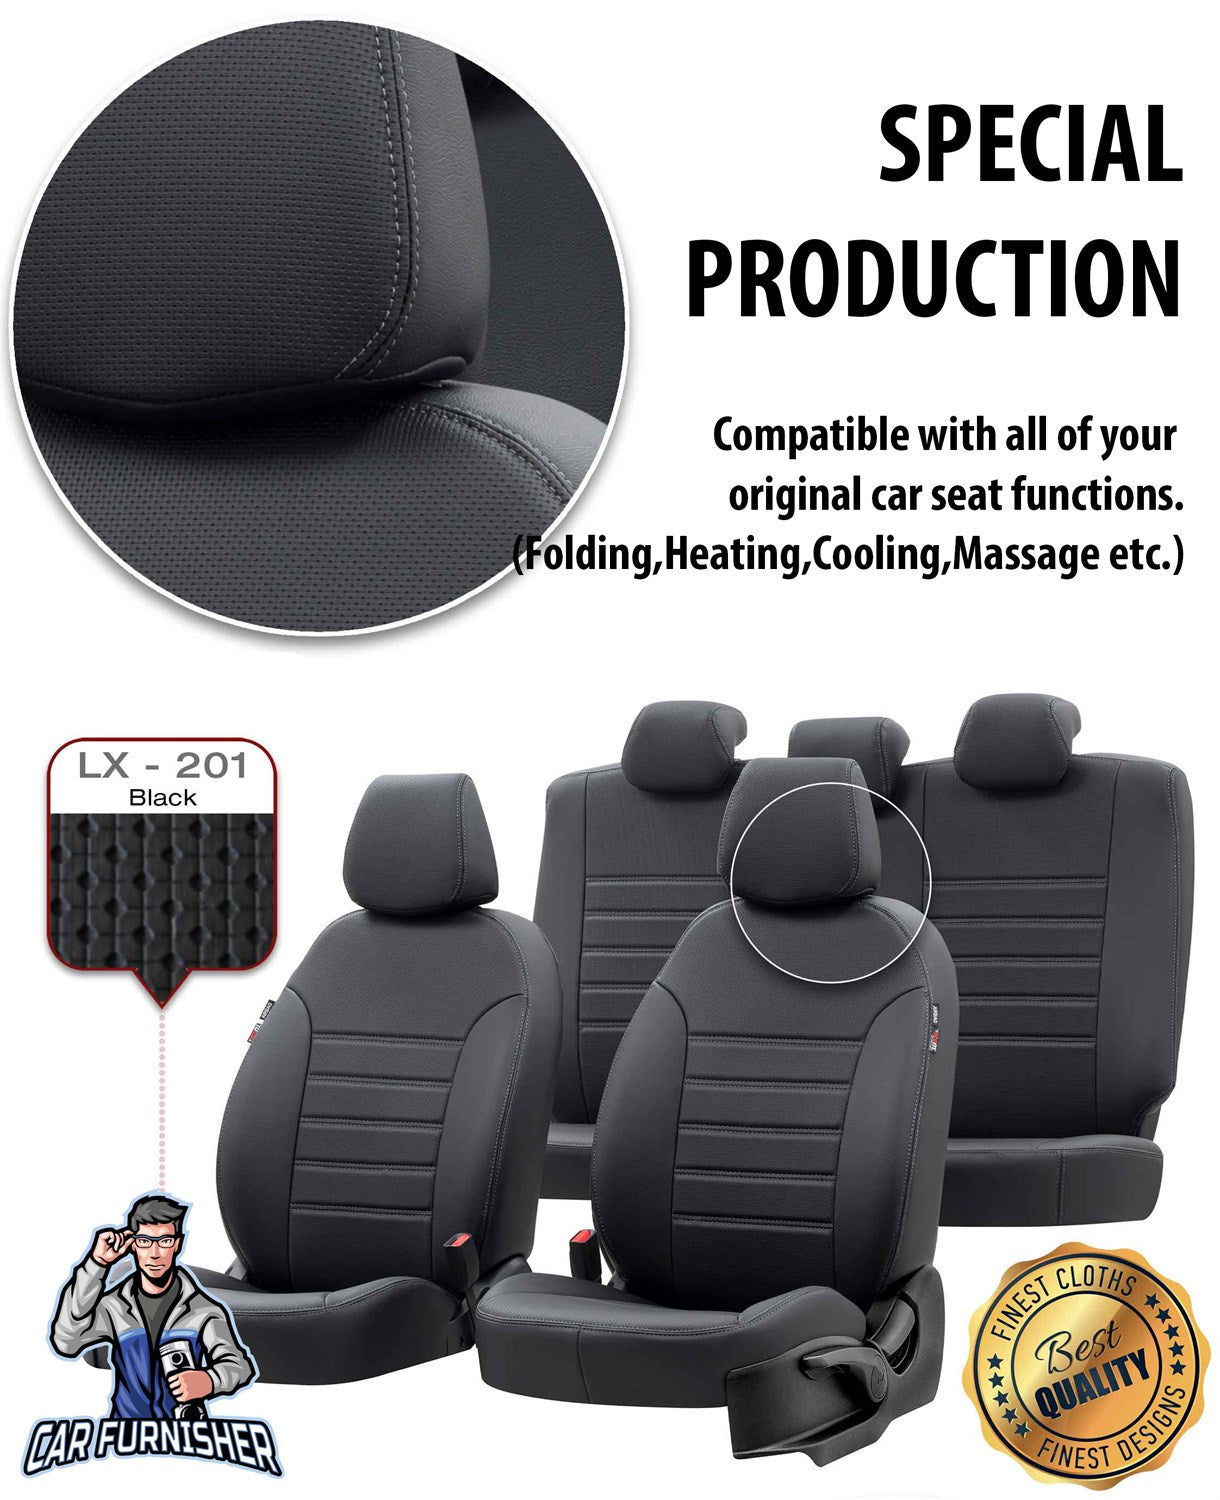 Volkswagen Jetta Seat Cover New York Leather Design Smoked Black Leather